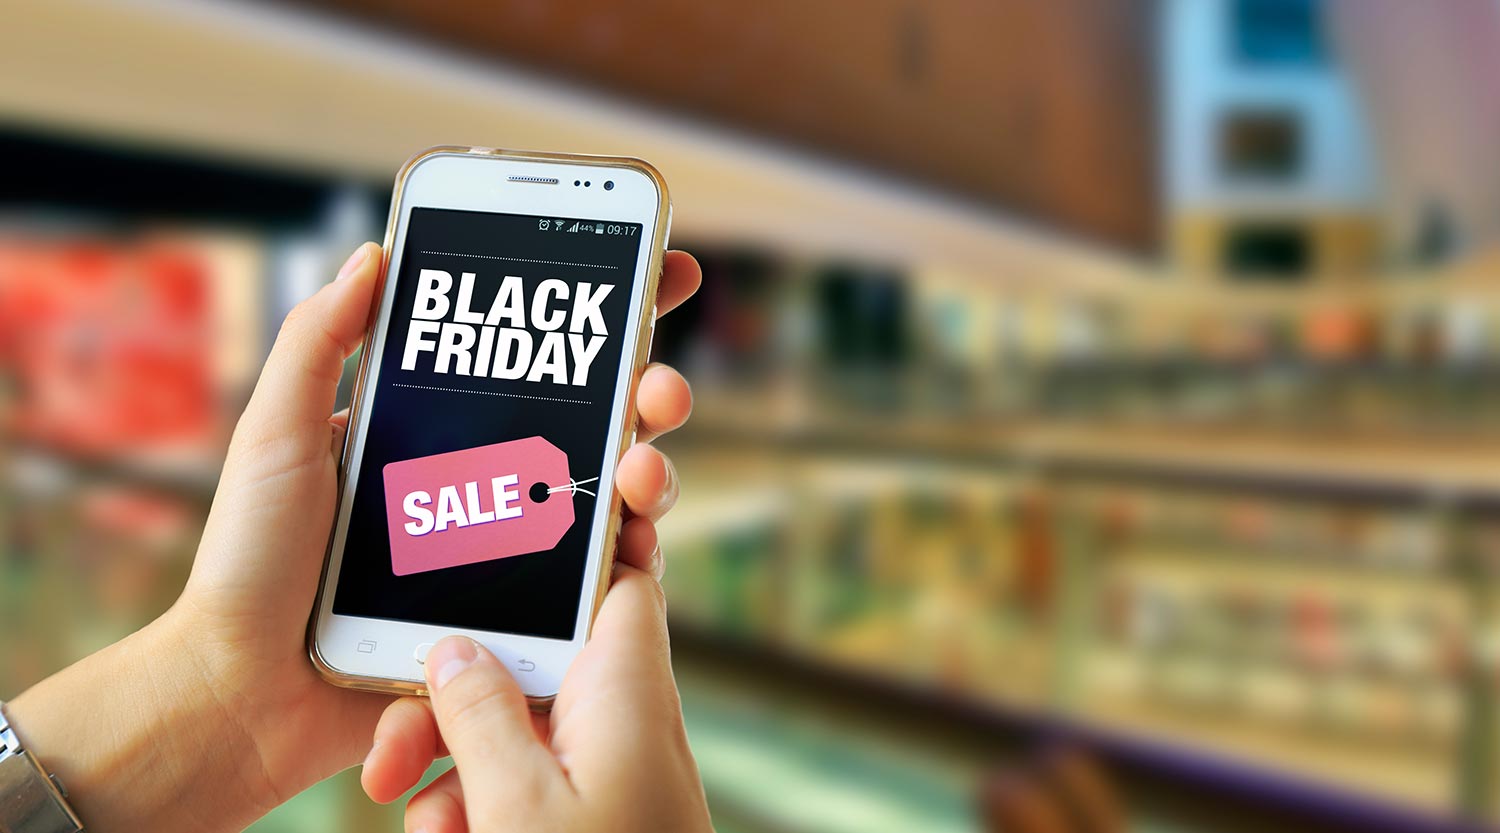 The Black Friday ecommerce guide for beginners